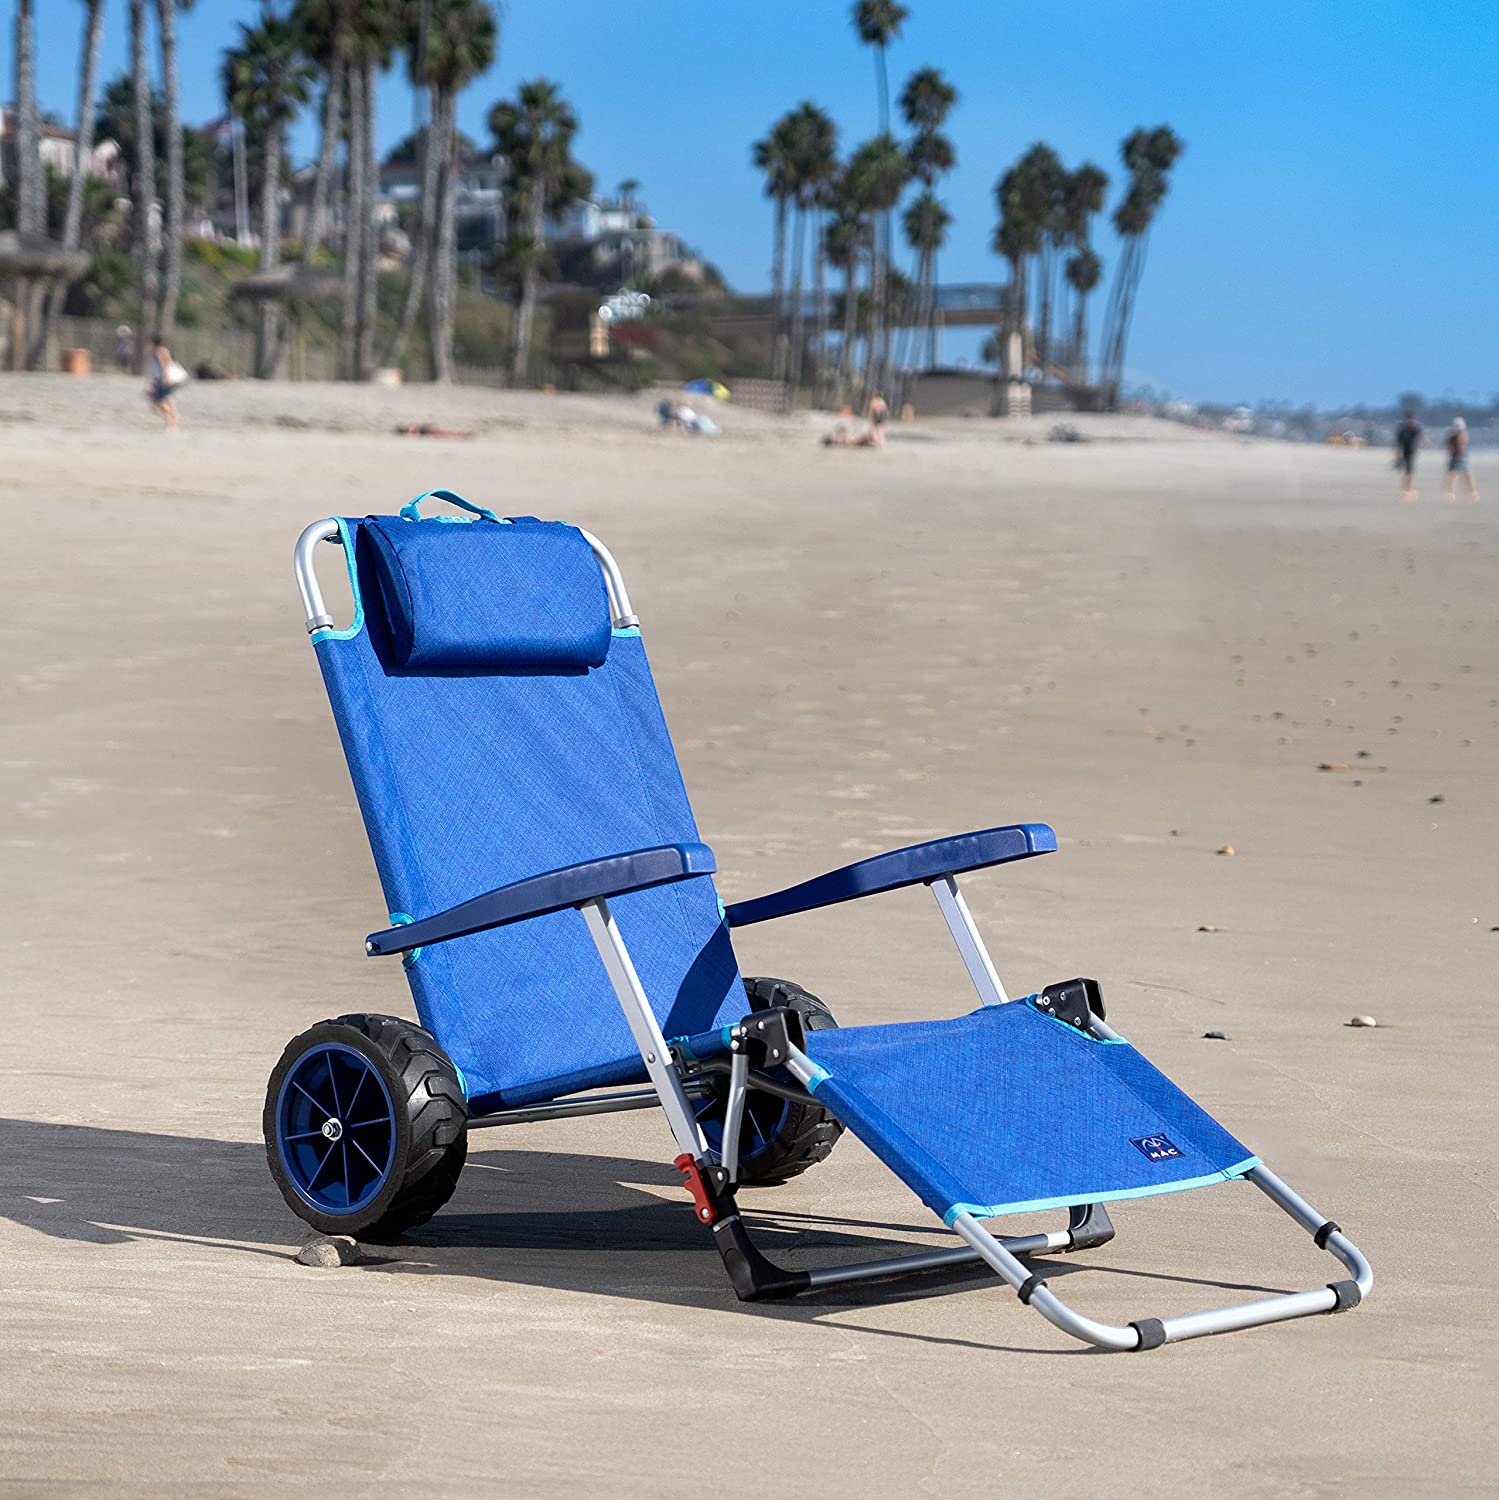 Top 10 Best Beach Lounge Chairs in 2021Top Best Pro Reviews